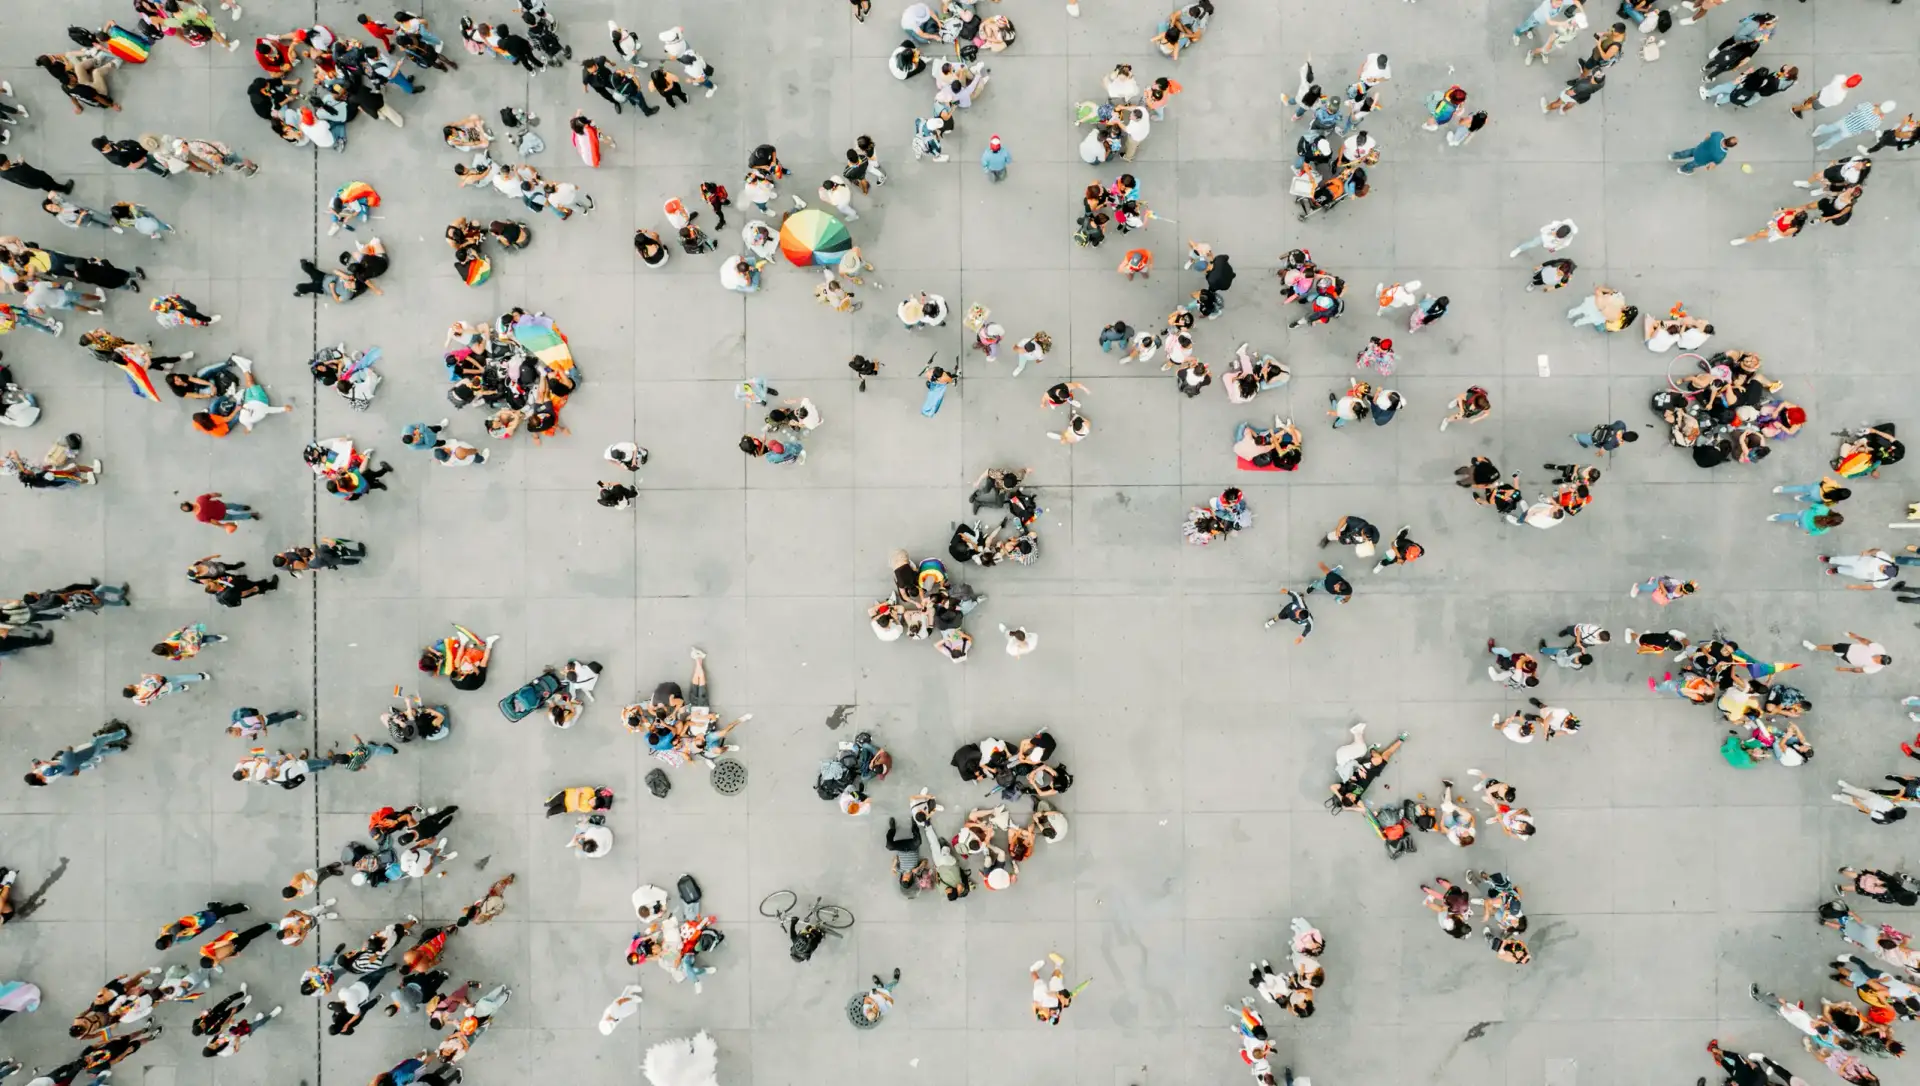 An arial photo looking down on a crowd of people - B2B Demand Generation